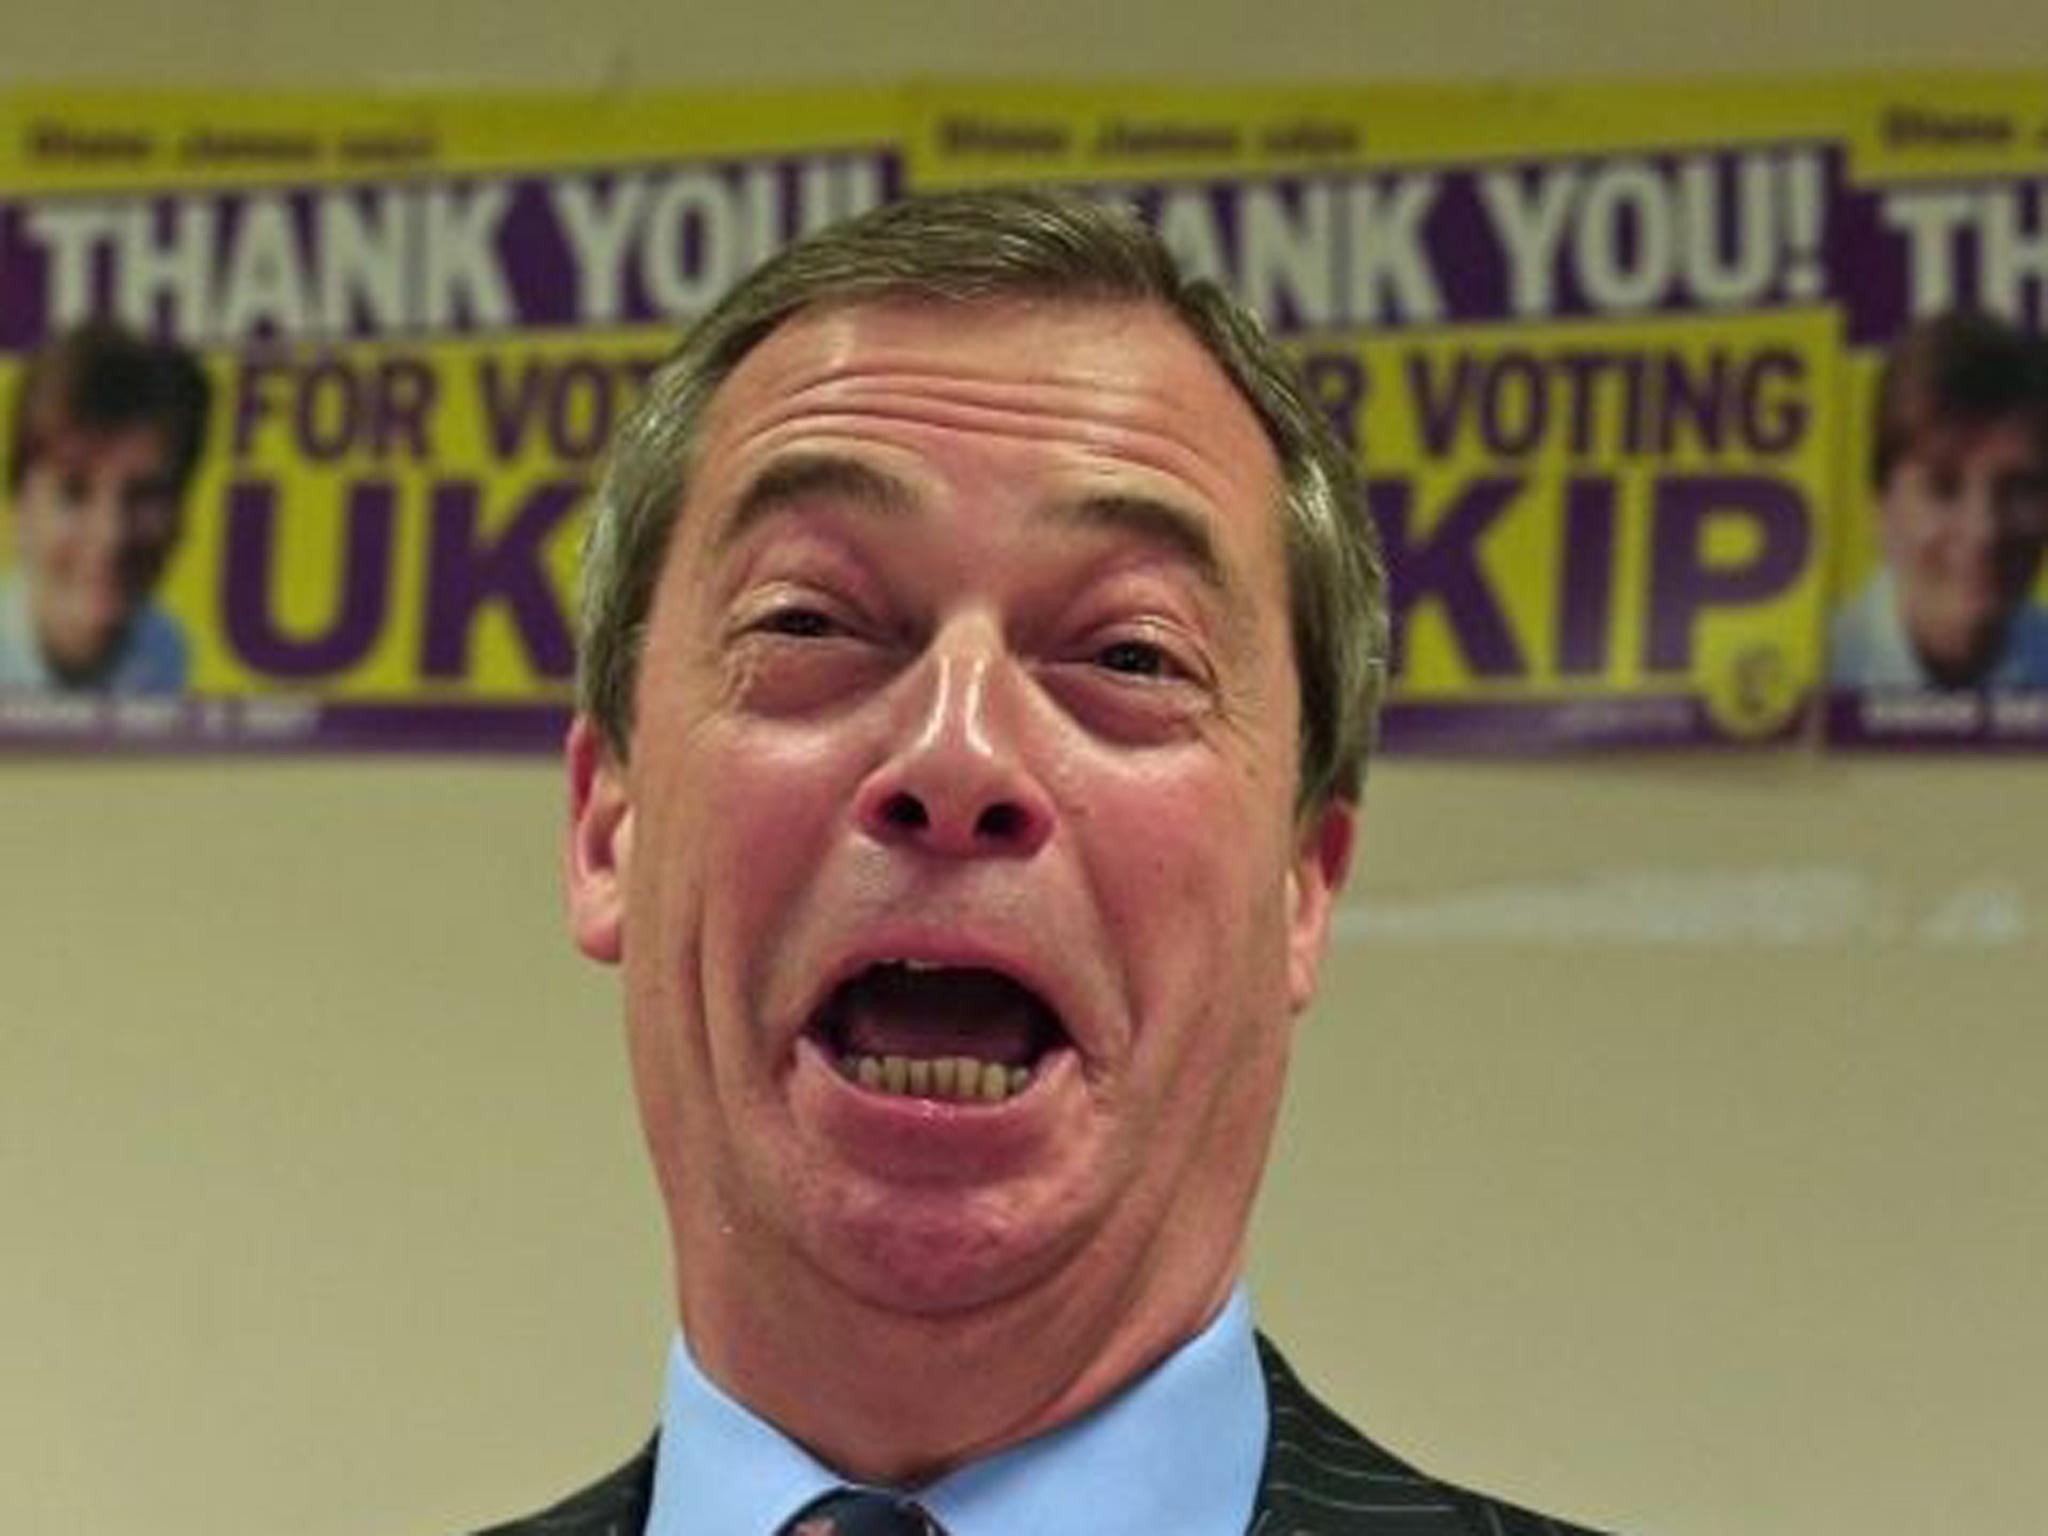 Ukip leader Nigel Farage in laughing mood after the by-election result in Eastleigh, Hampshire